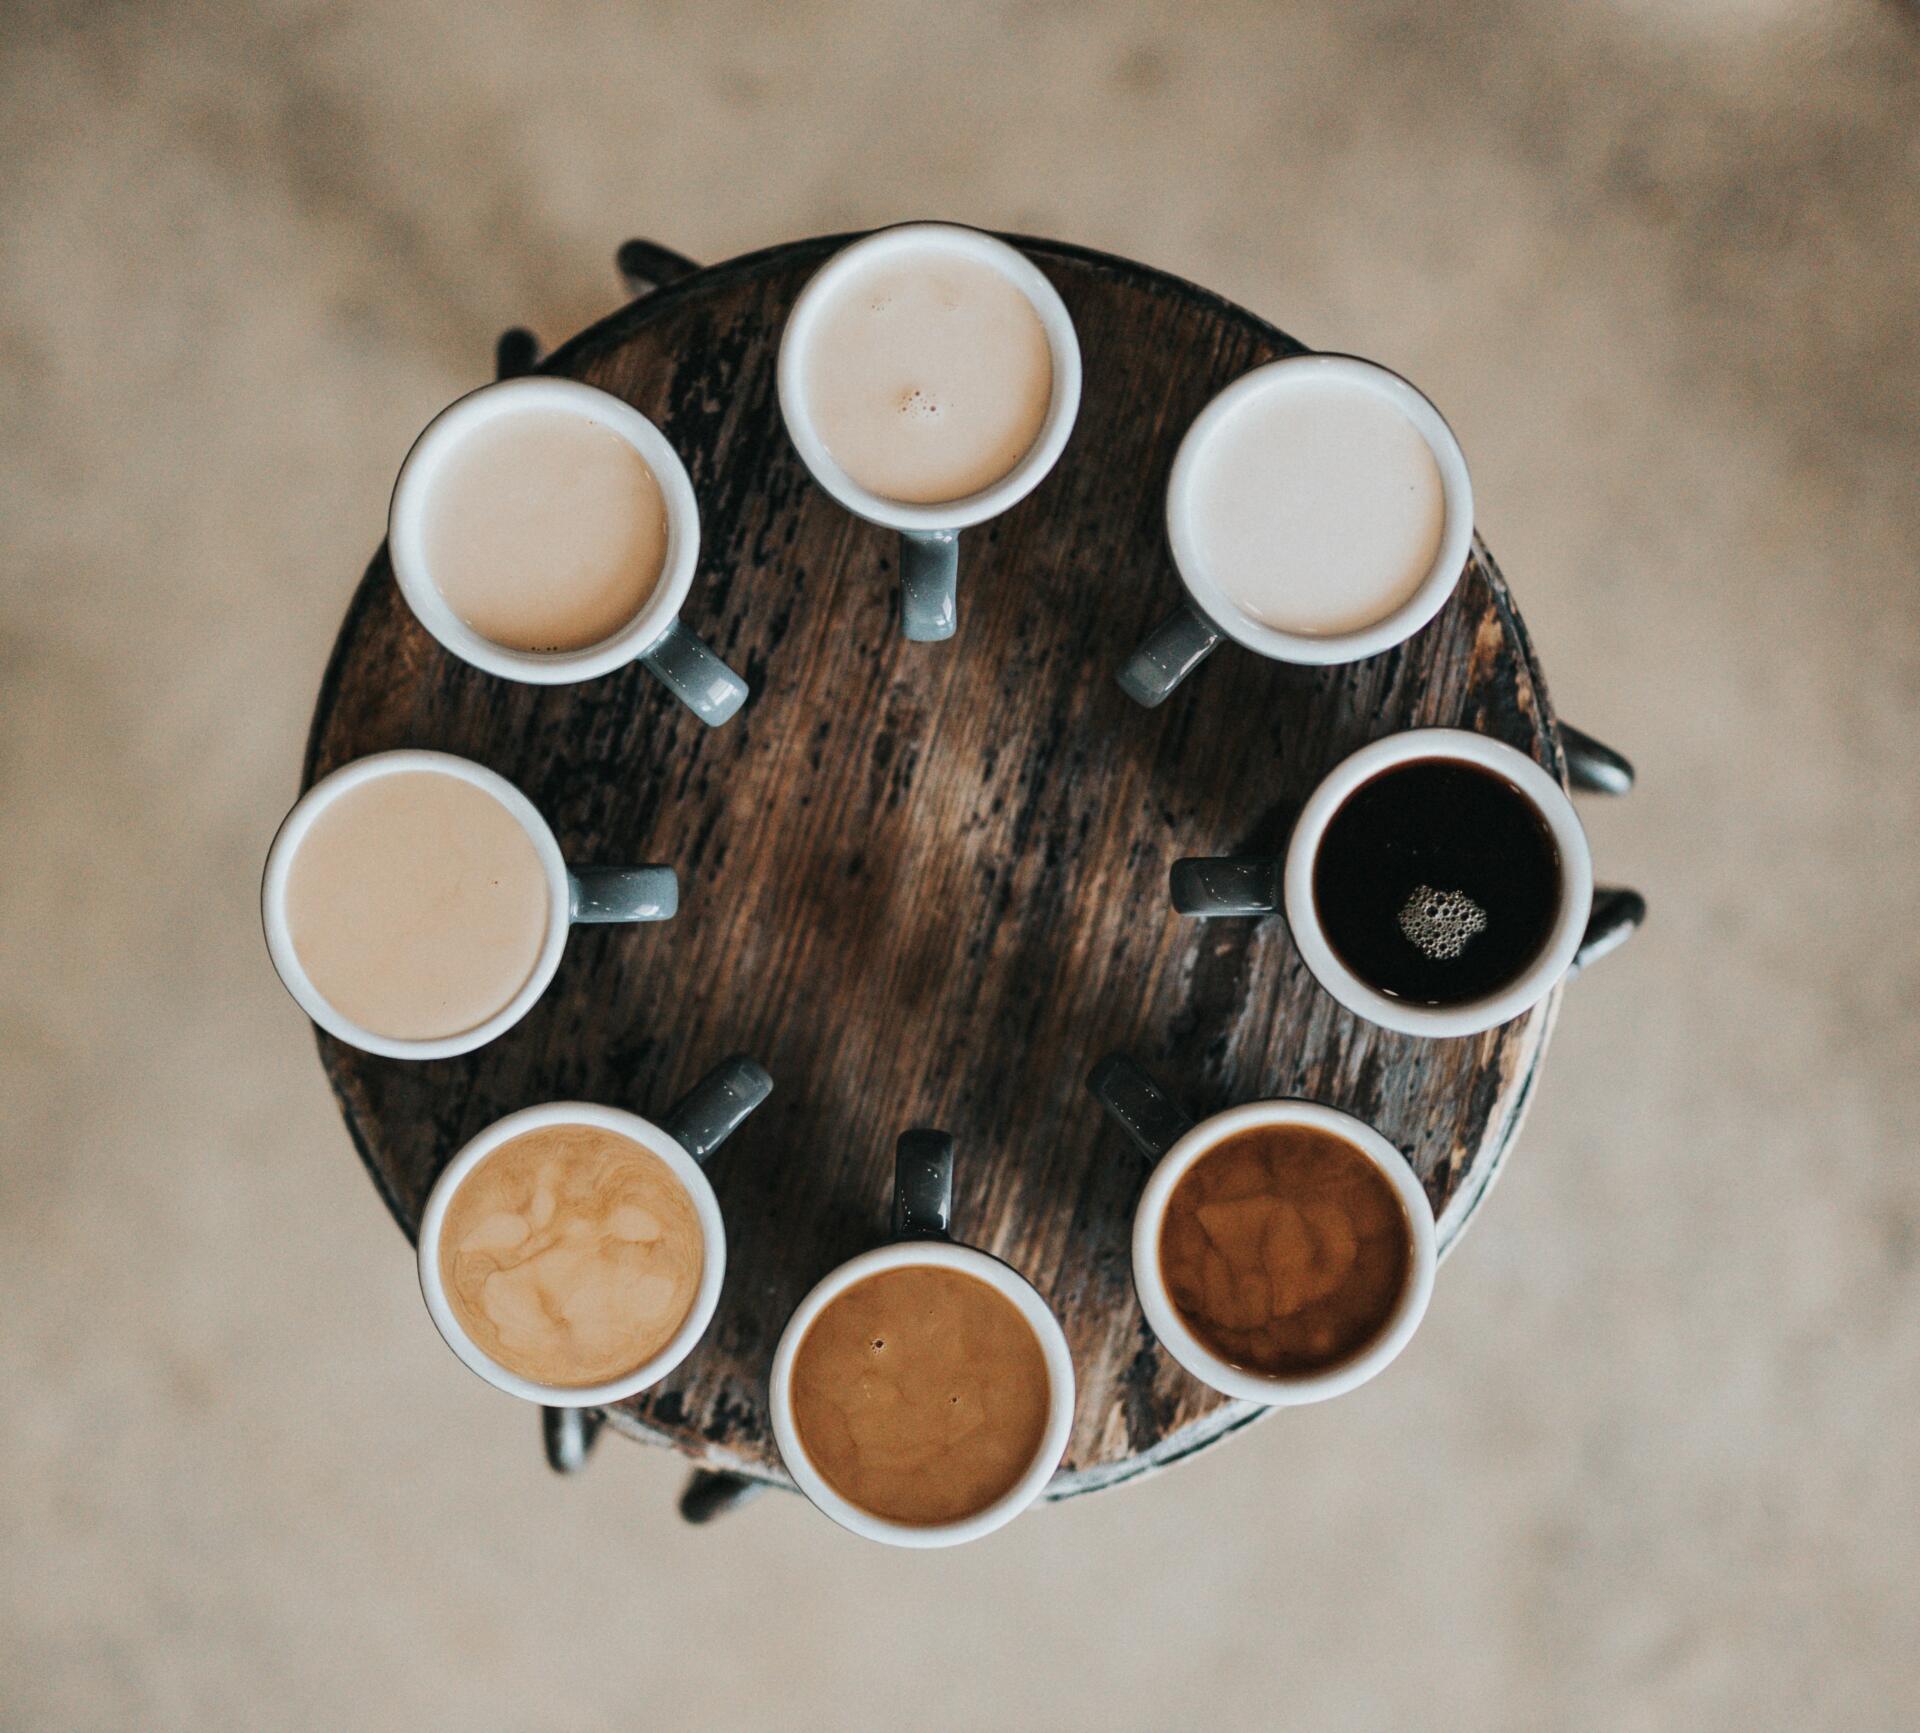 Several cups of coffee in varying shades meant to represent diversity displayed in a circle on a small table, viewed from above.